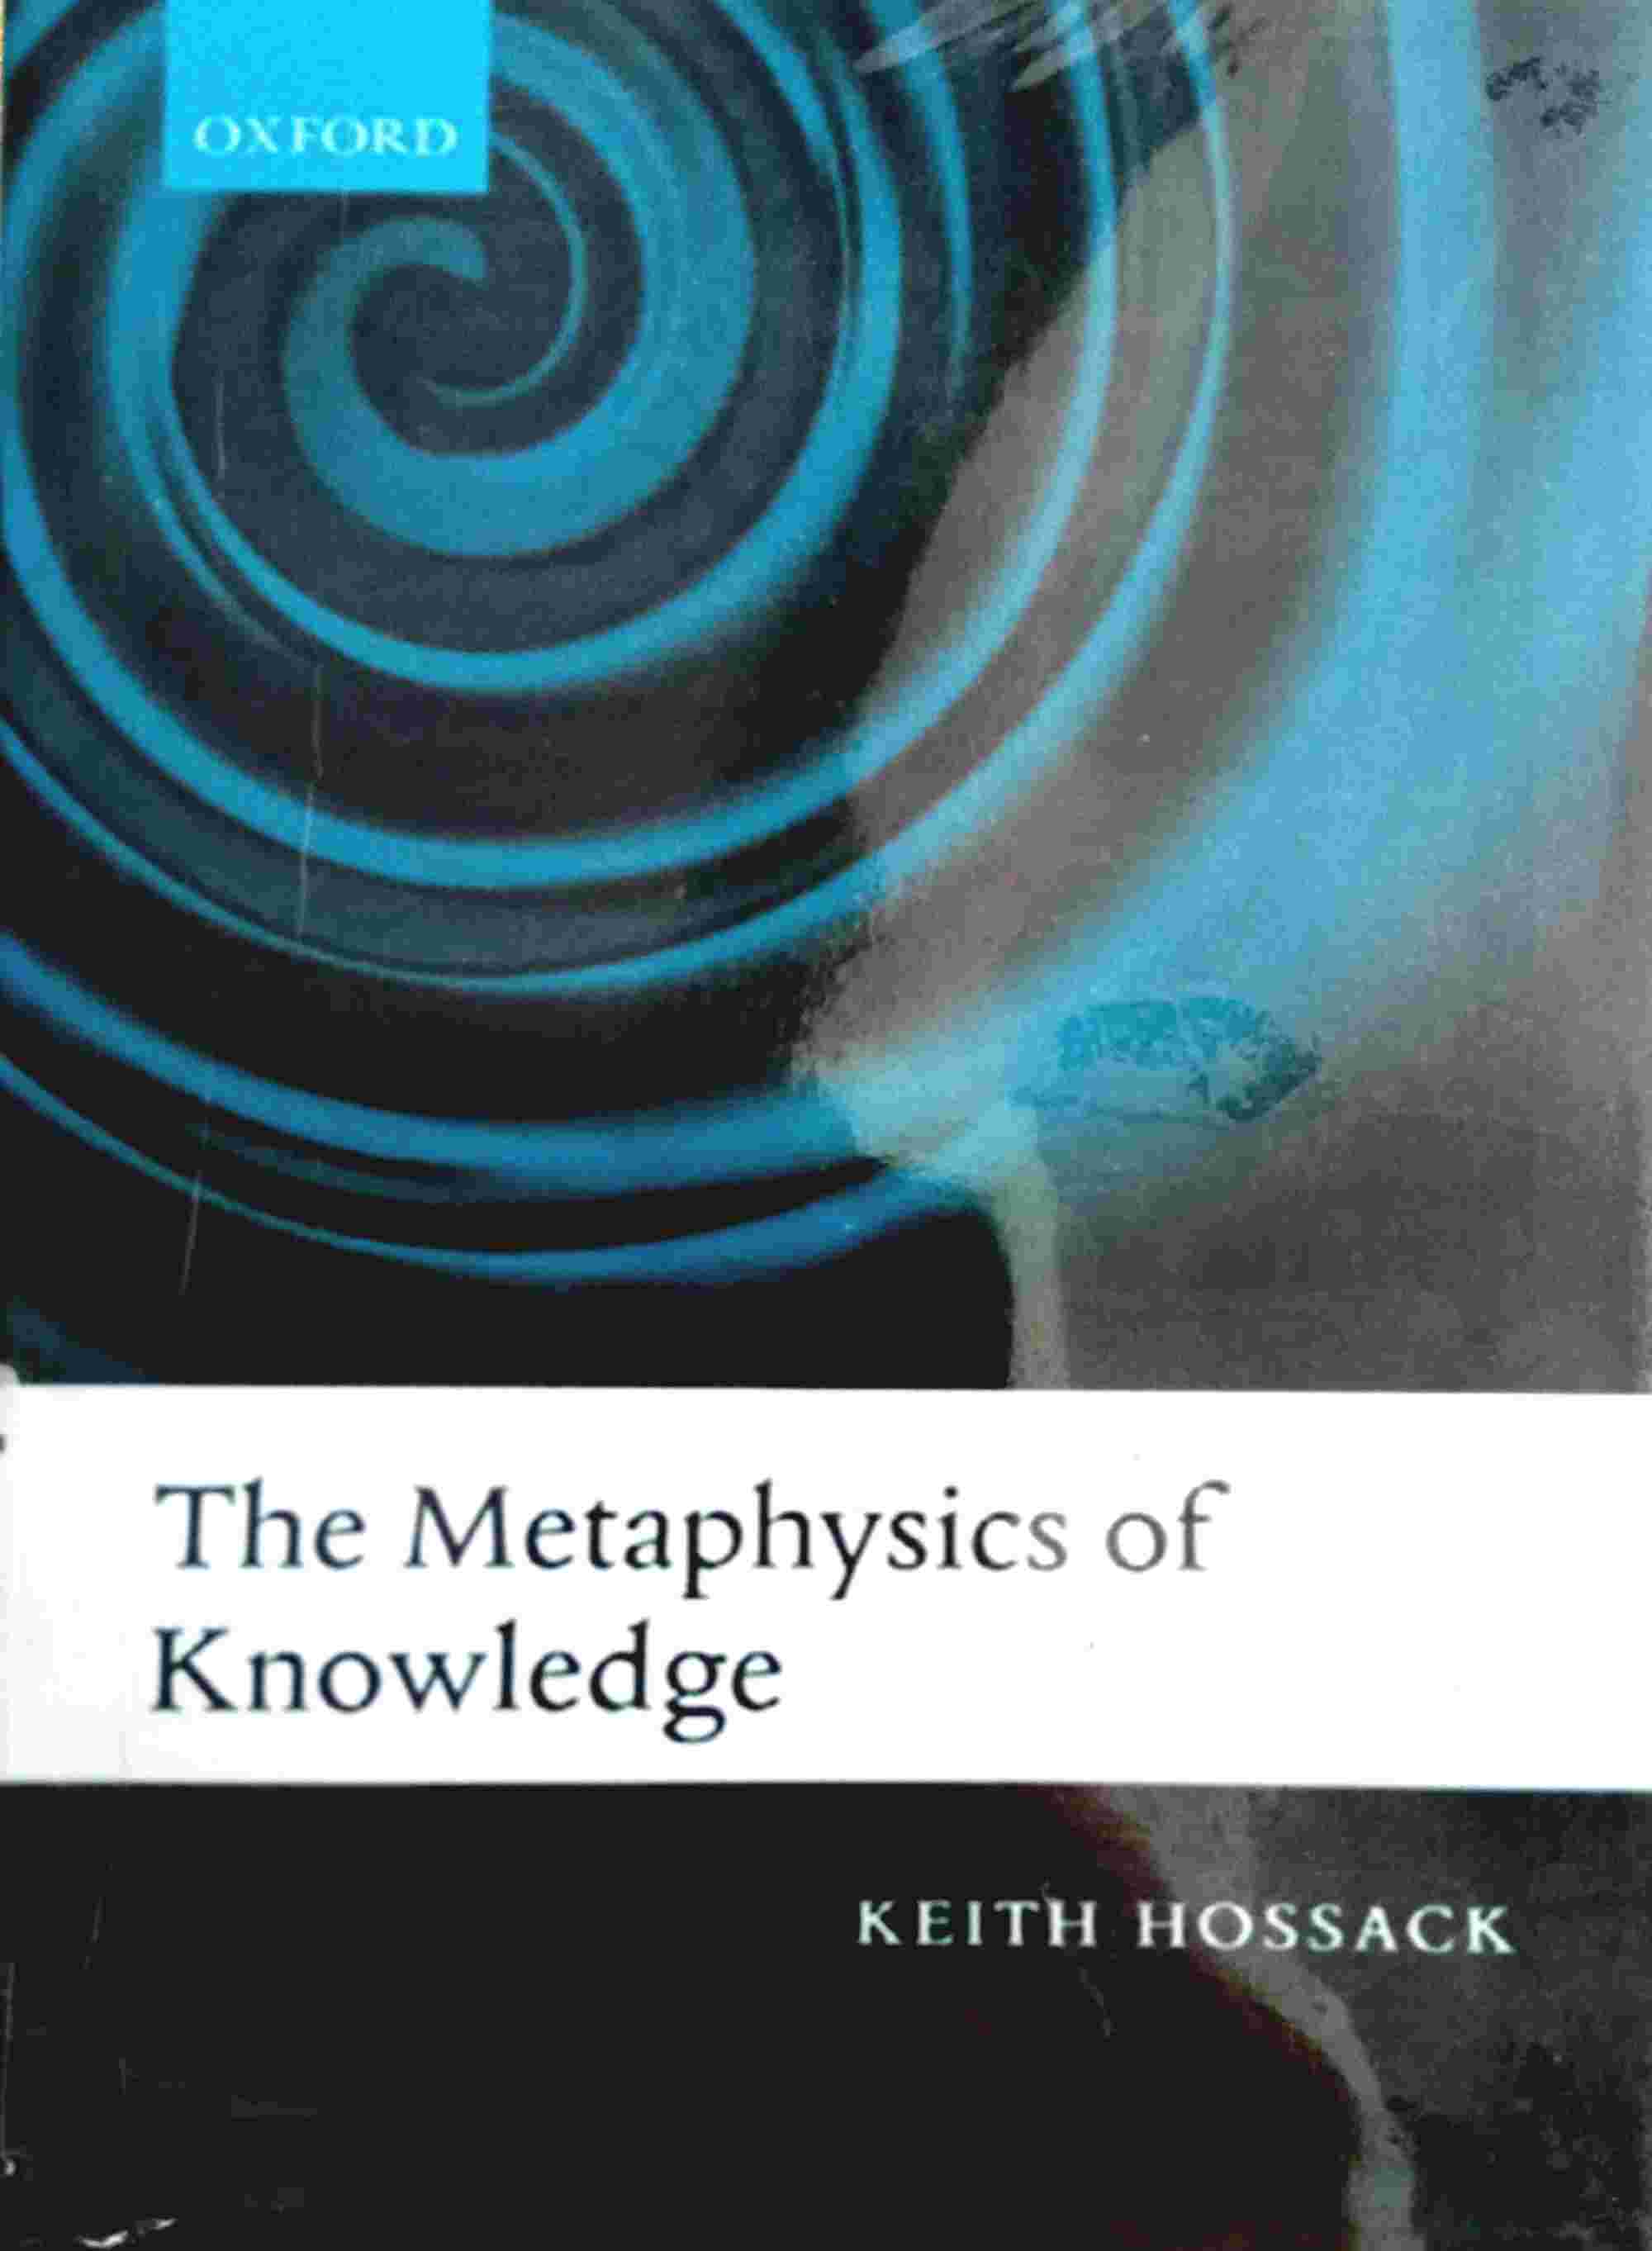 THE METAPHYSICS OF KNOWLEDGE